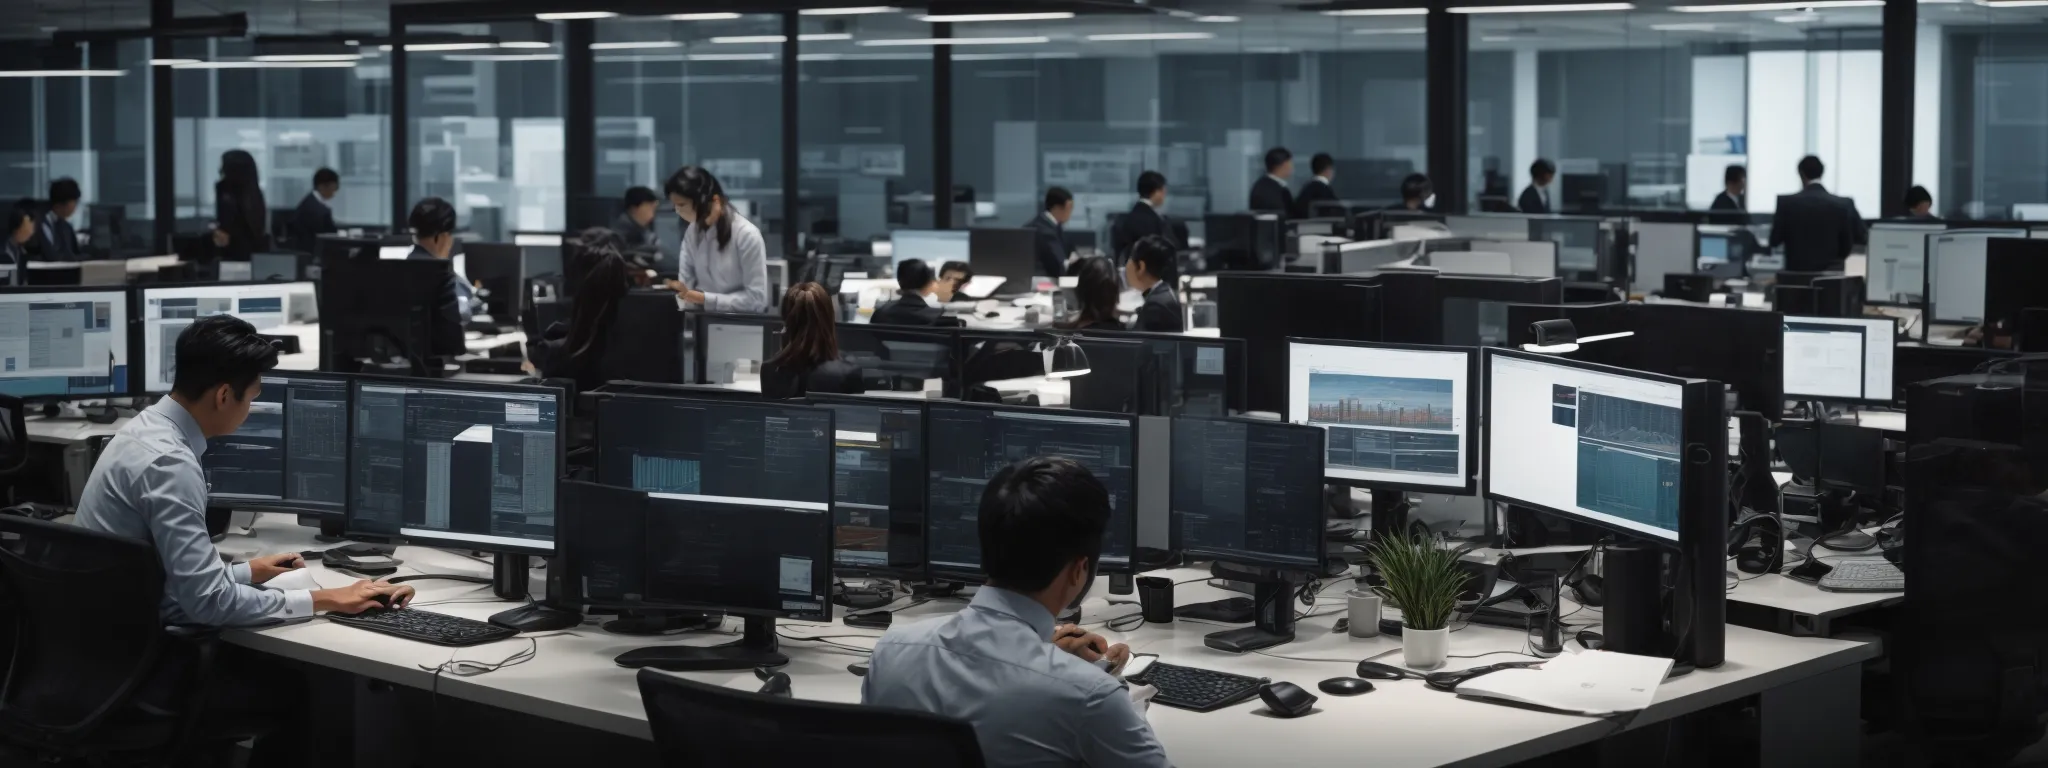 a busy corporate office with teams collaborating around high-tech computers and digital analytics displayed on monitors.